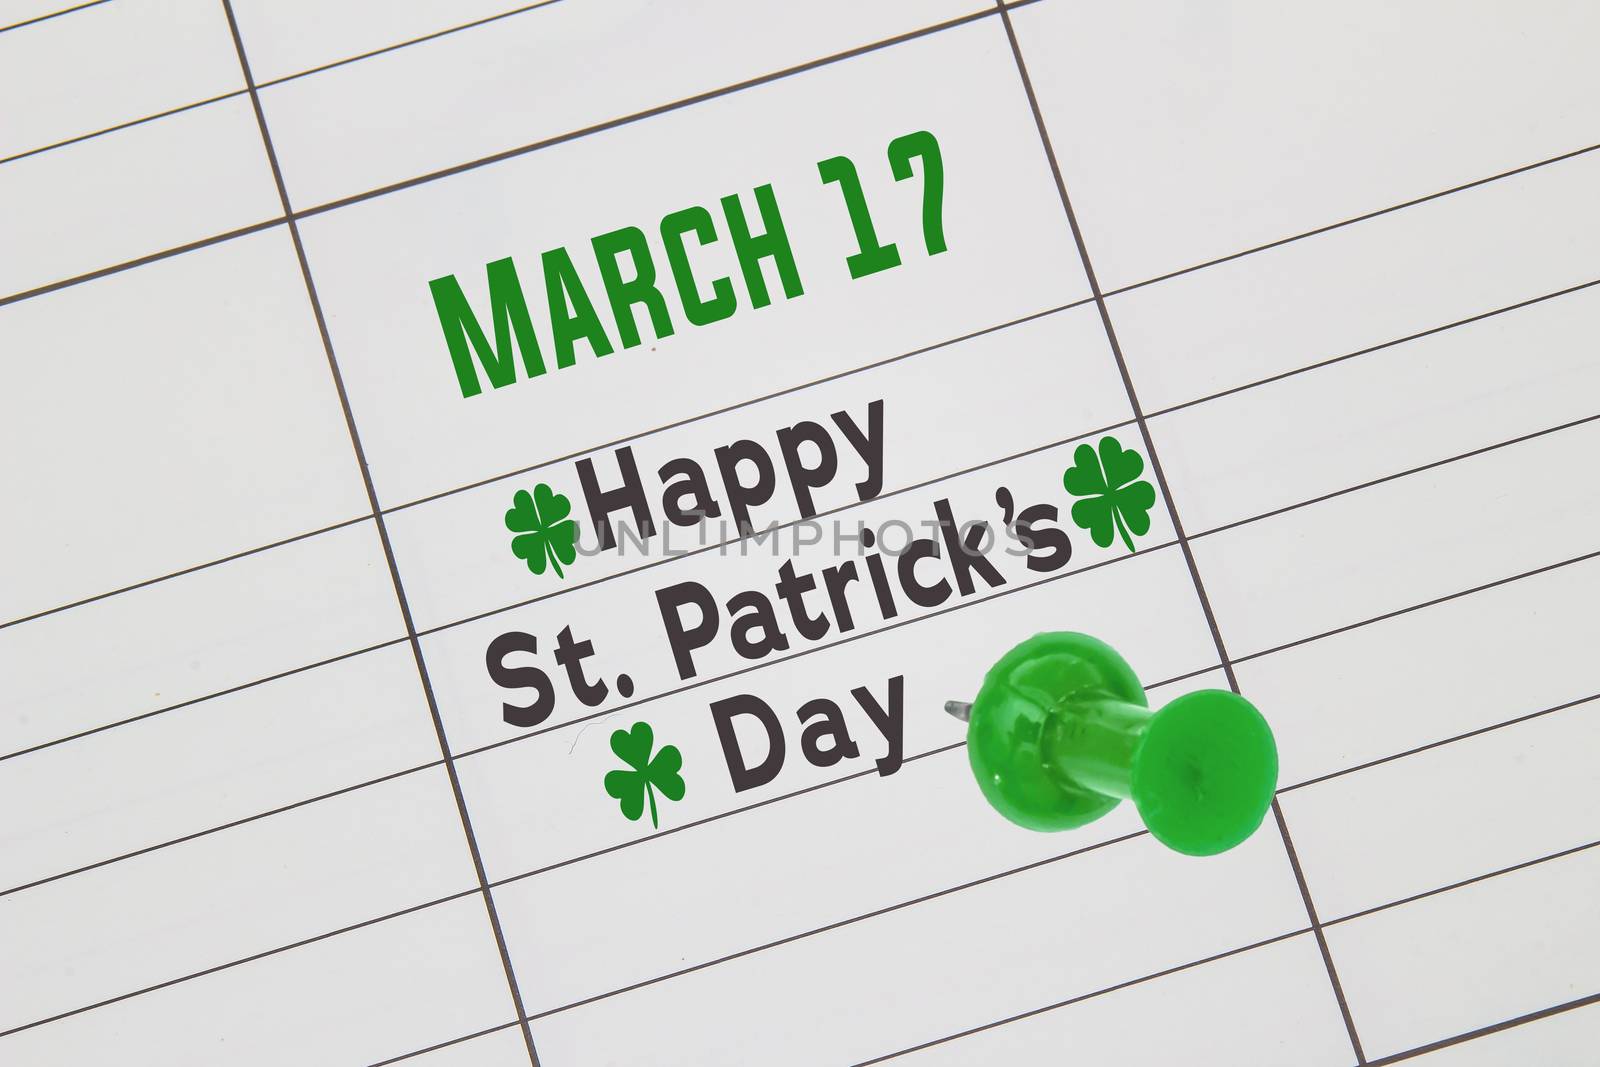 A close up of a calendar on March 17 with the text: Happy St. Patrick's Day by oasisamuel